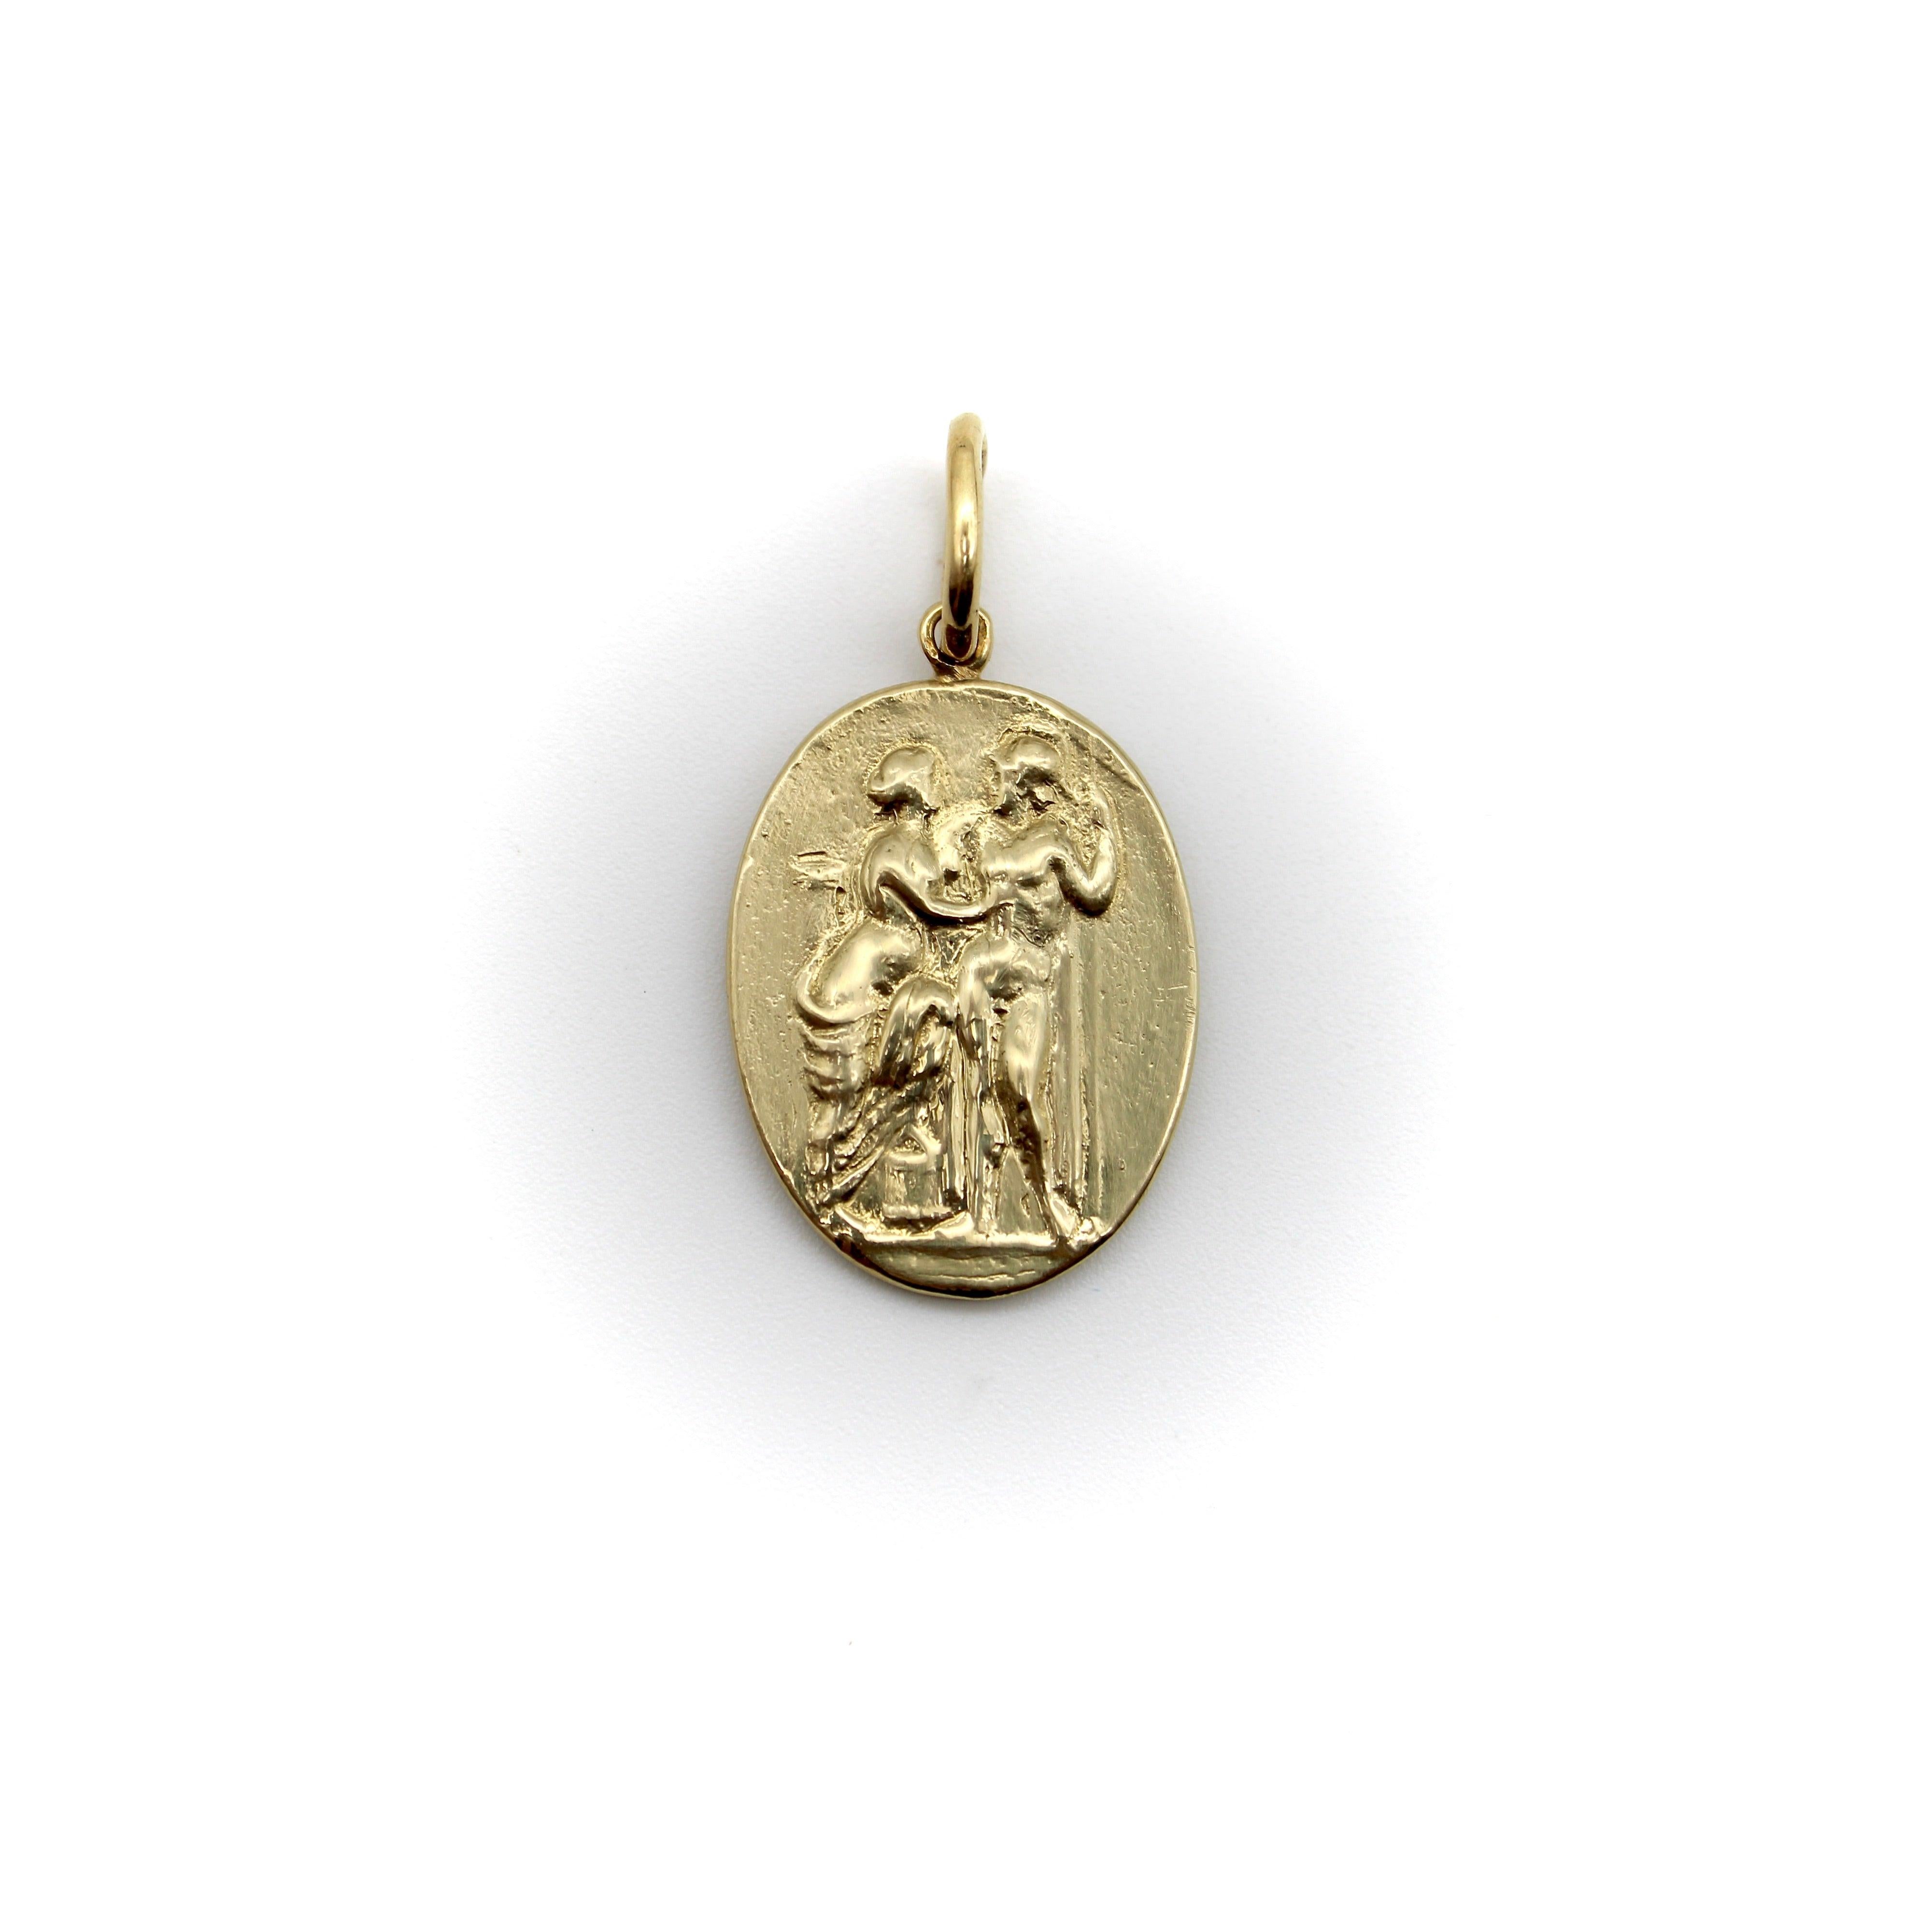 Created as part of our signature collection, this 14k gold intaglio medallion depicts Venus and Mars, standing in an embrace. Venus, the goddess of love and beauty, is loosely draped in a cloth, while her lover Mars, the god of war, stands before